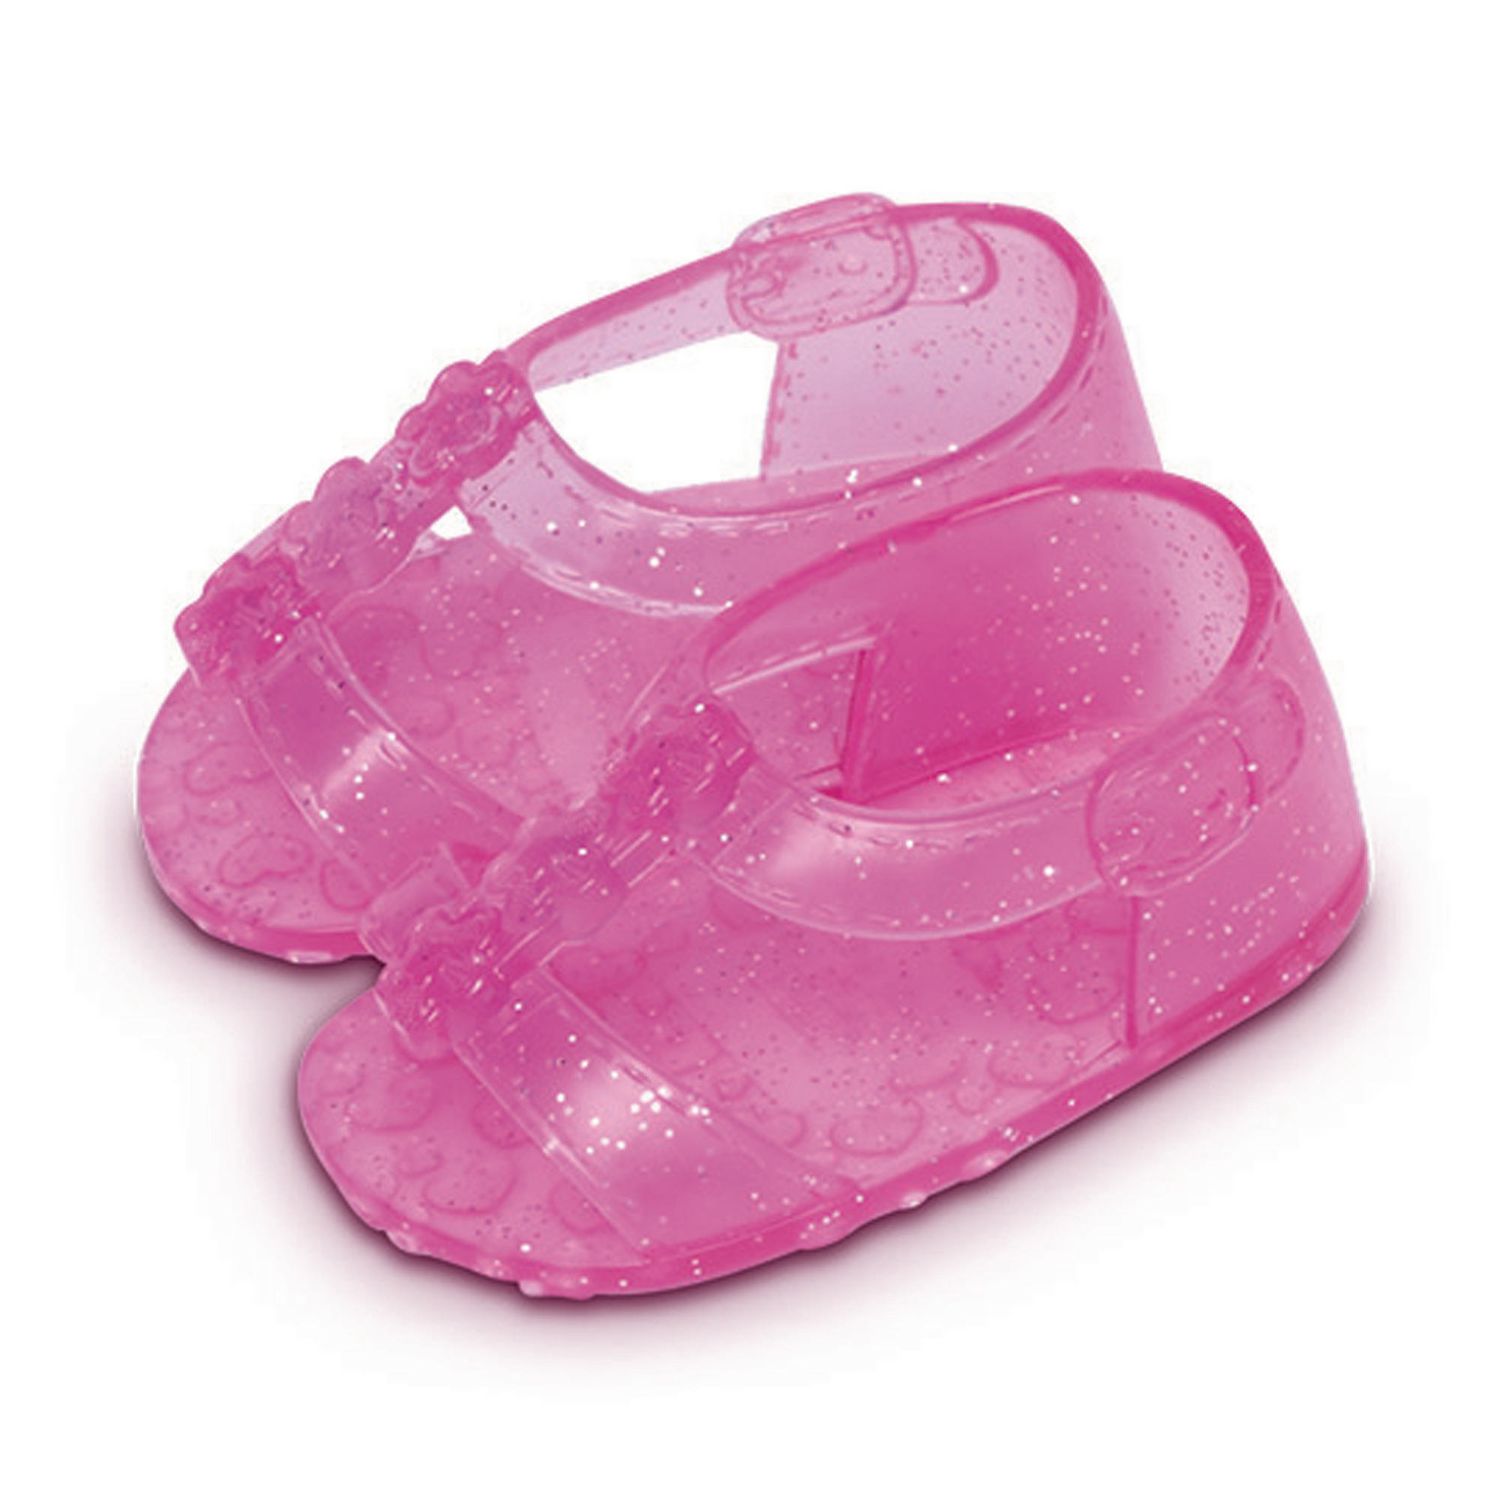 My Life As Pink T-Strap Sandles | Walmart Canada